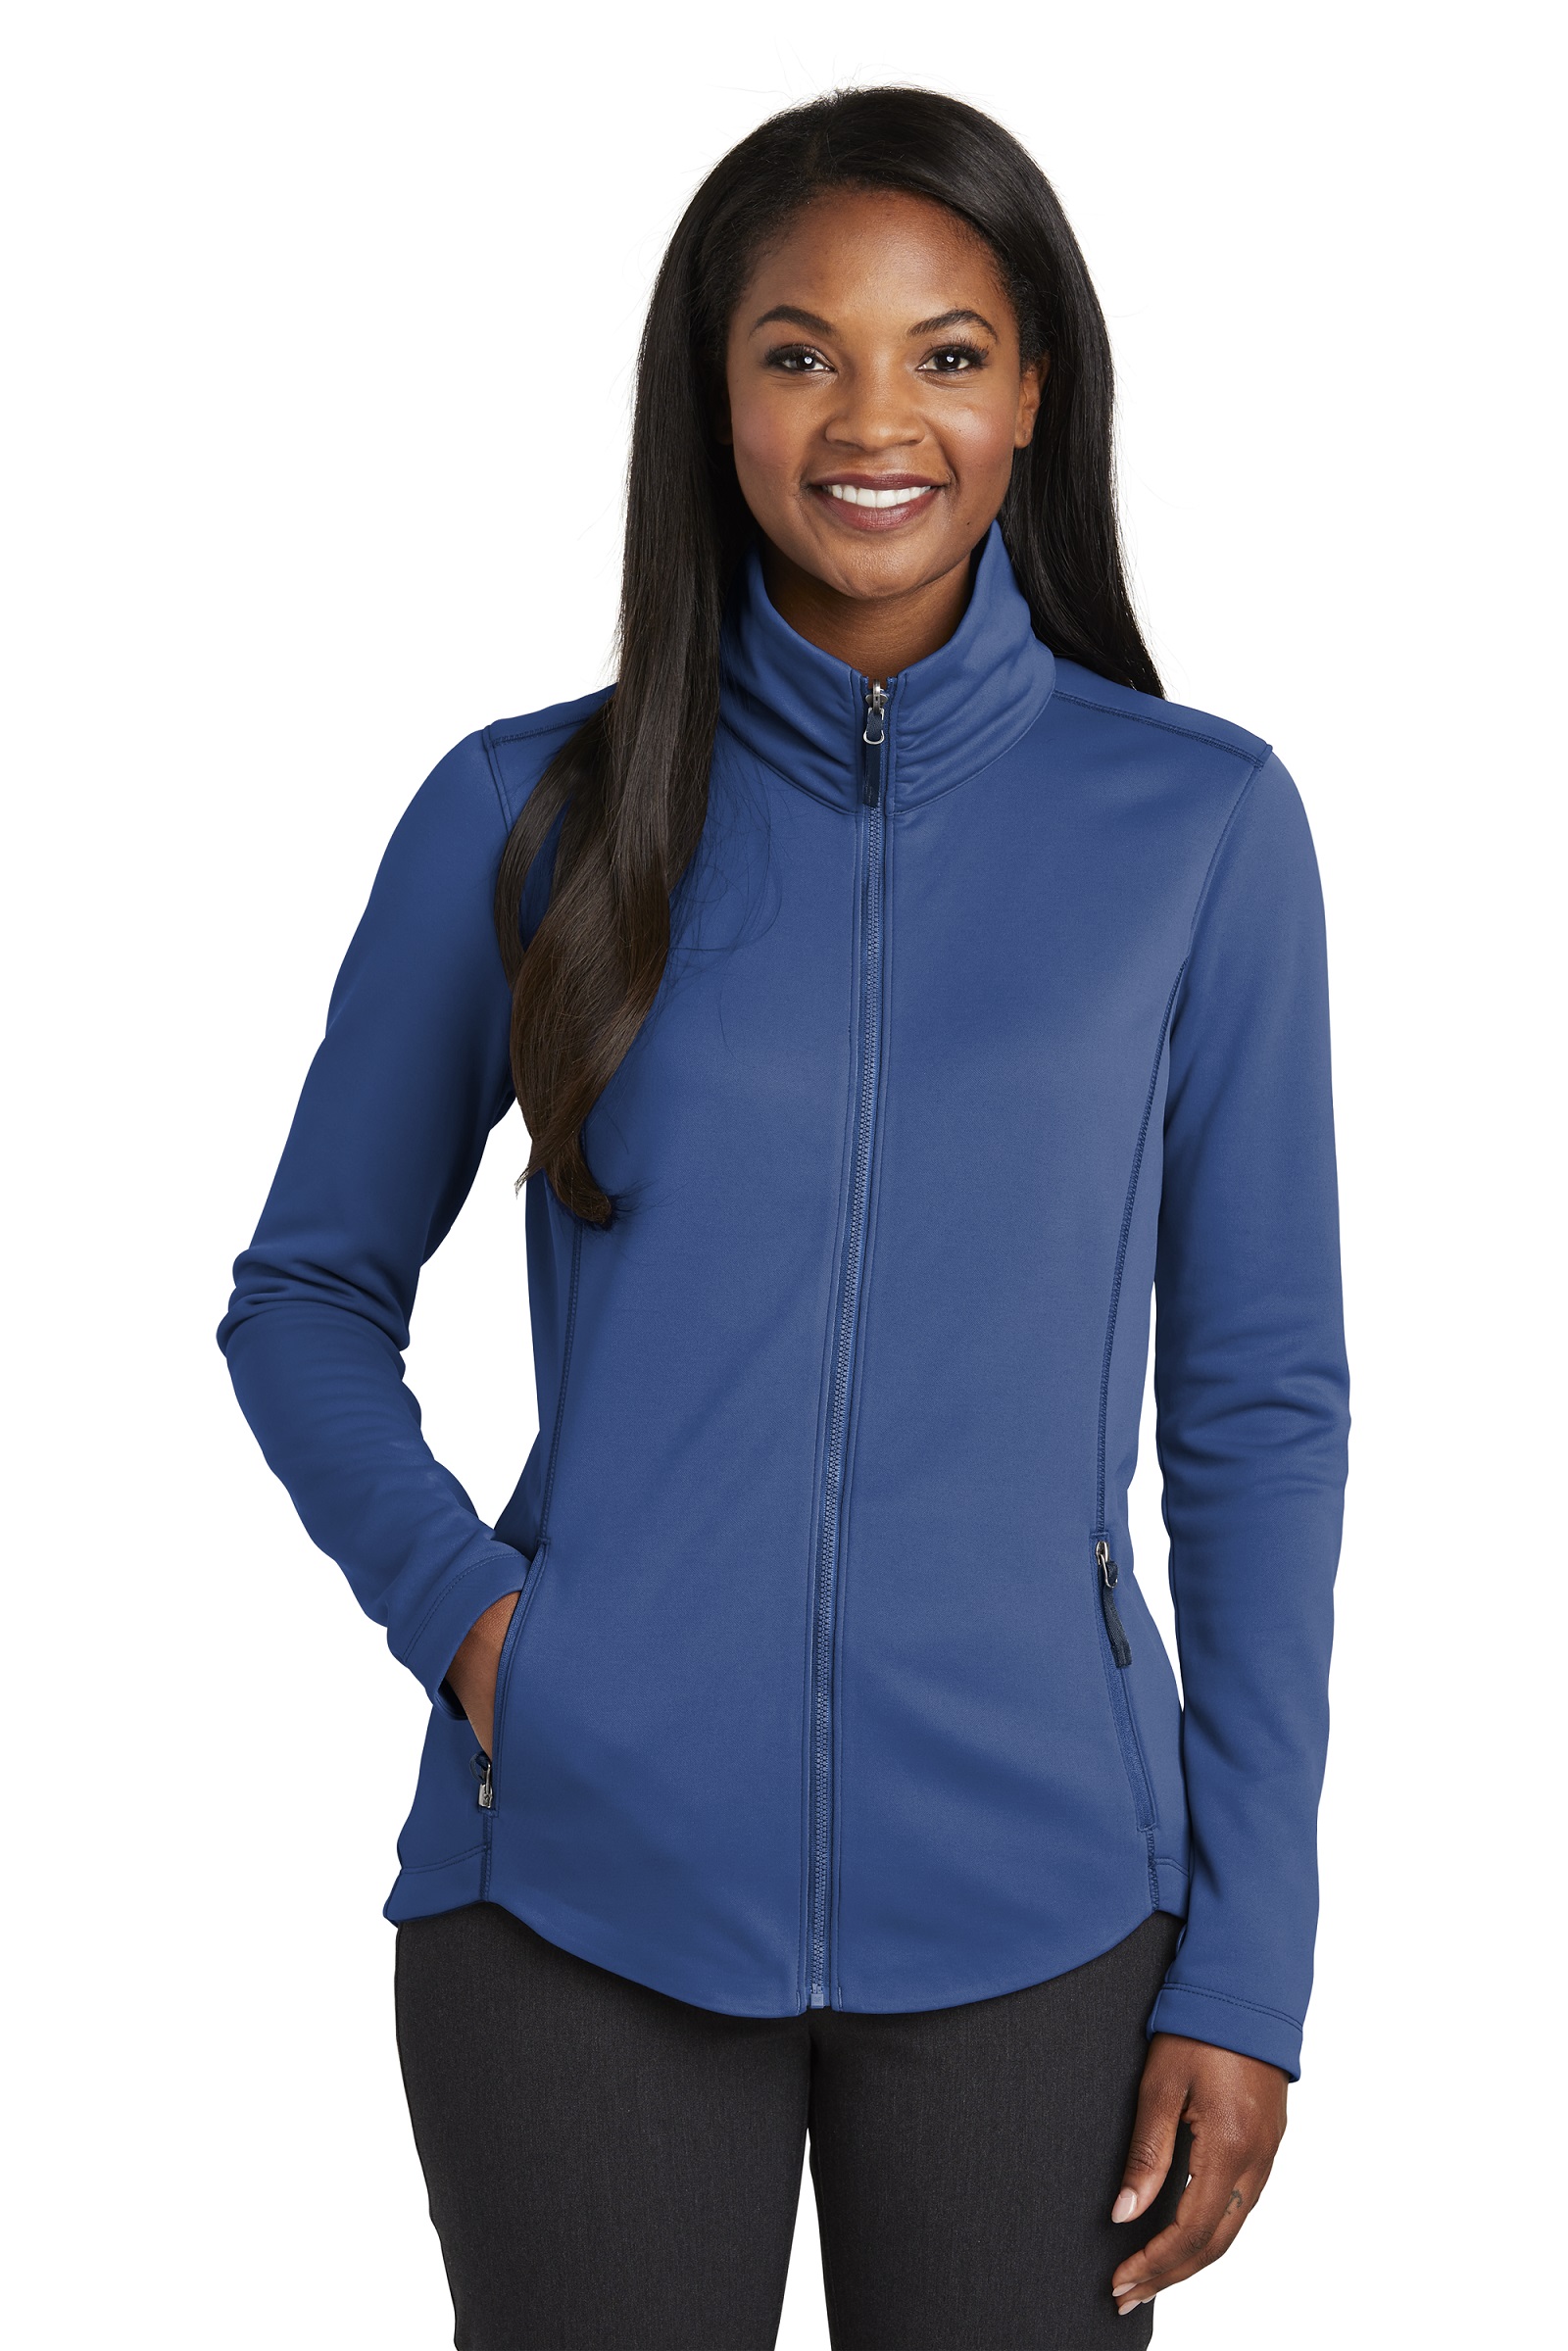 Port Authority Embroidered Women's Collective Smooth Fleece Jacket